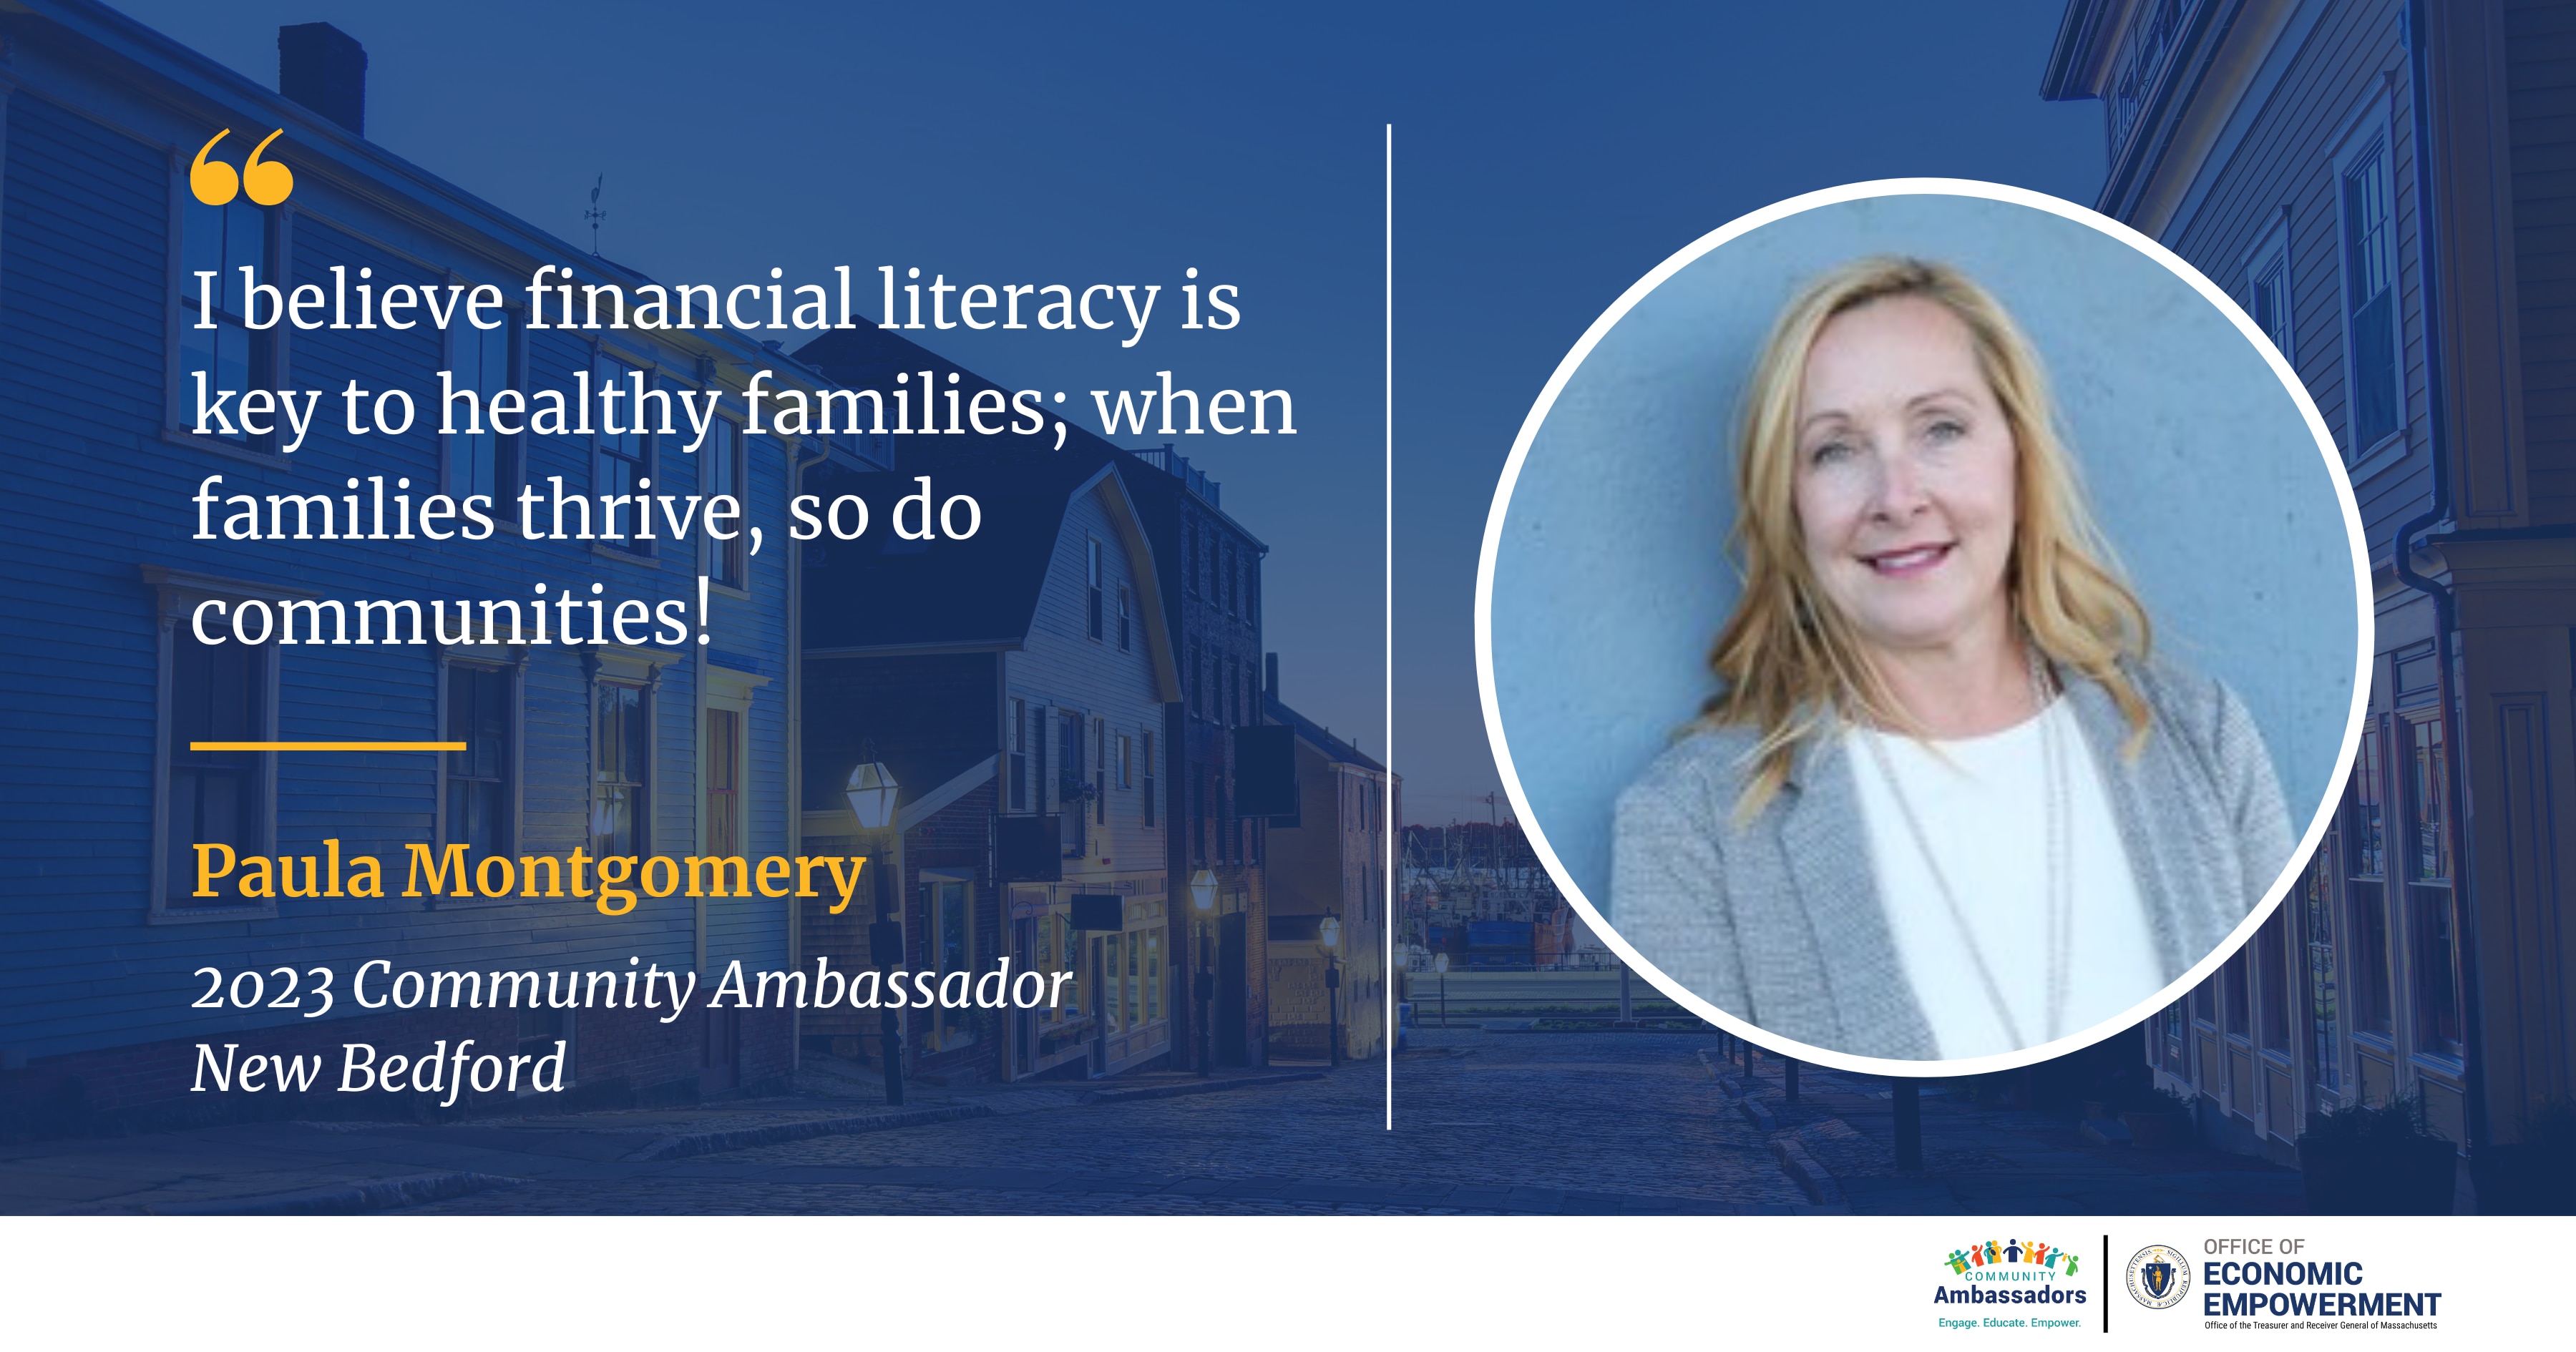 A photo of Paula Montgomery with text reading: "I believe financial literacy is key to healthy families; when families thrive, so do communities! Paula Montgomery. 2023 Community Ambassador. New Bedford."